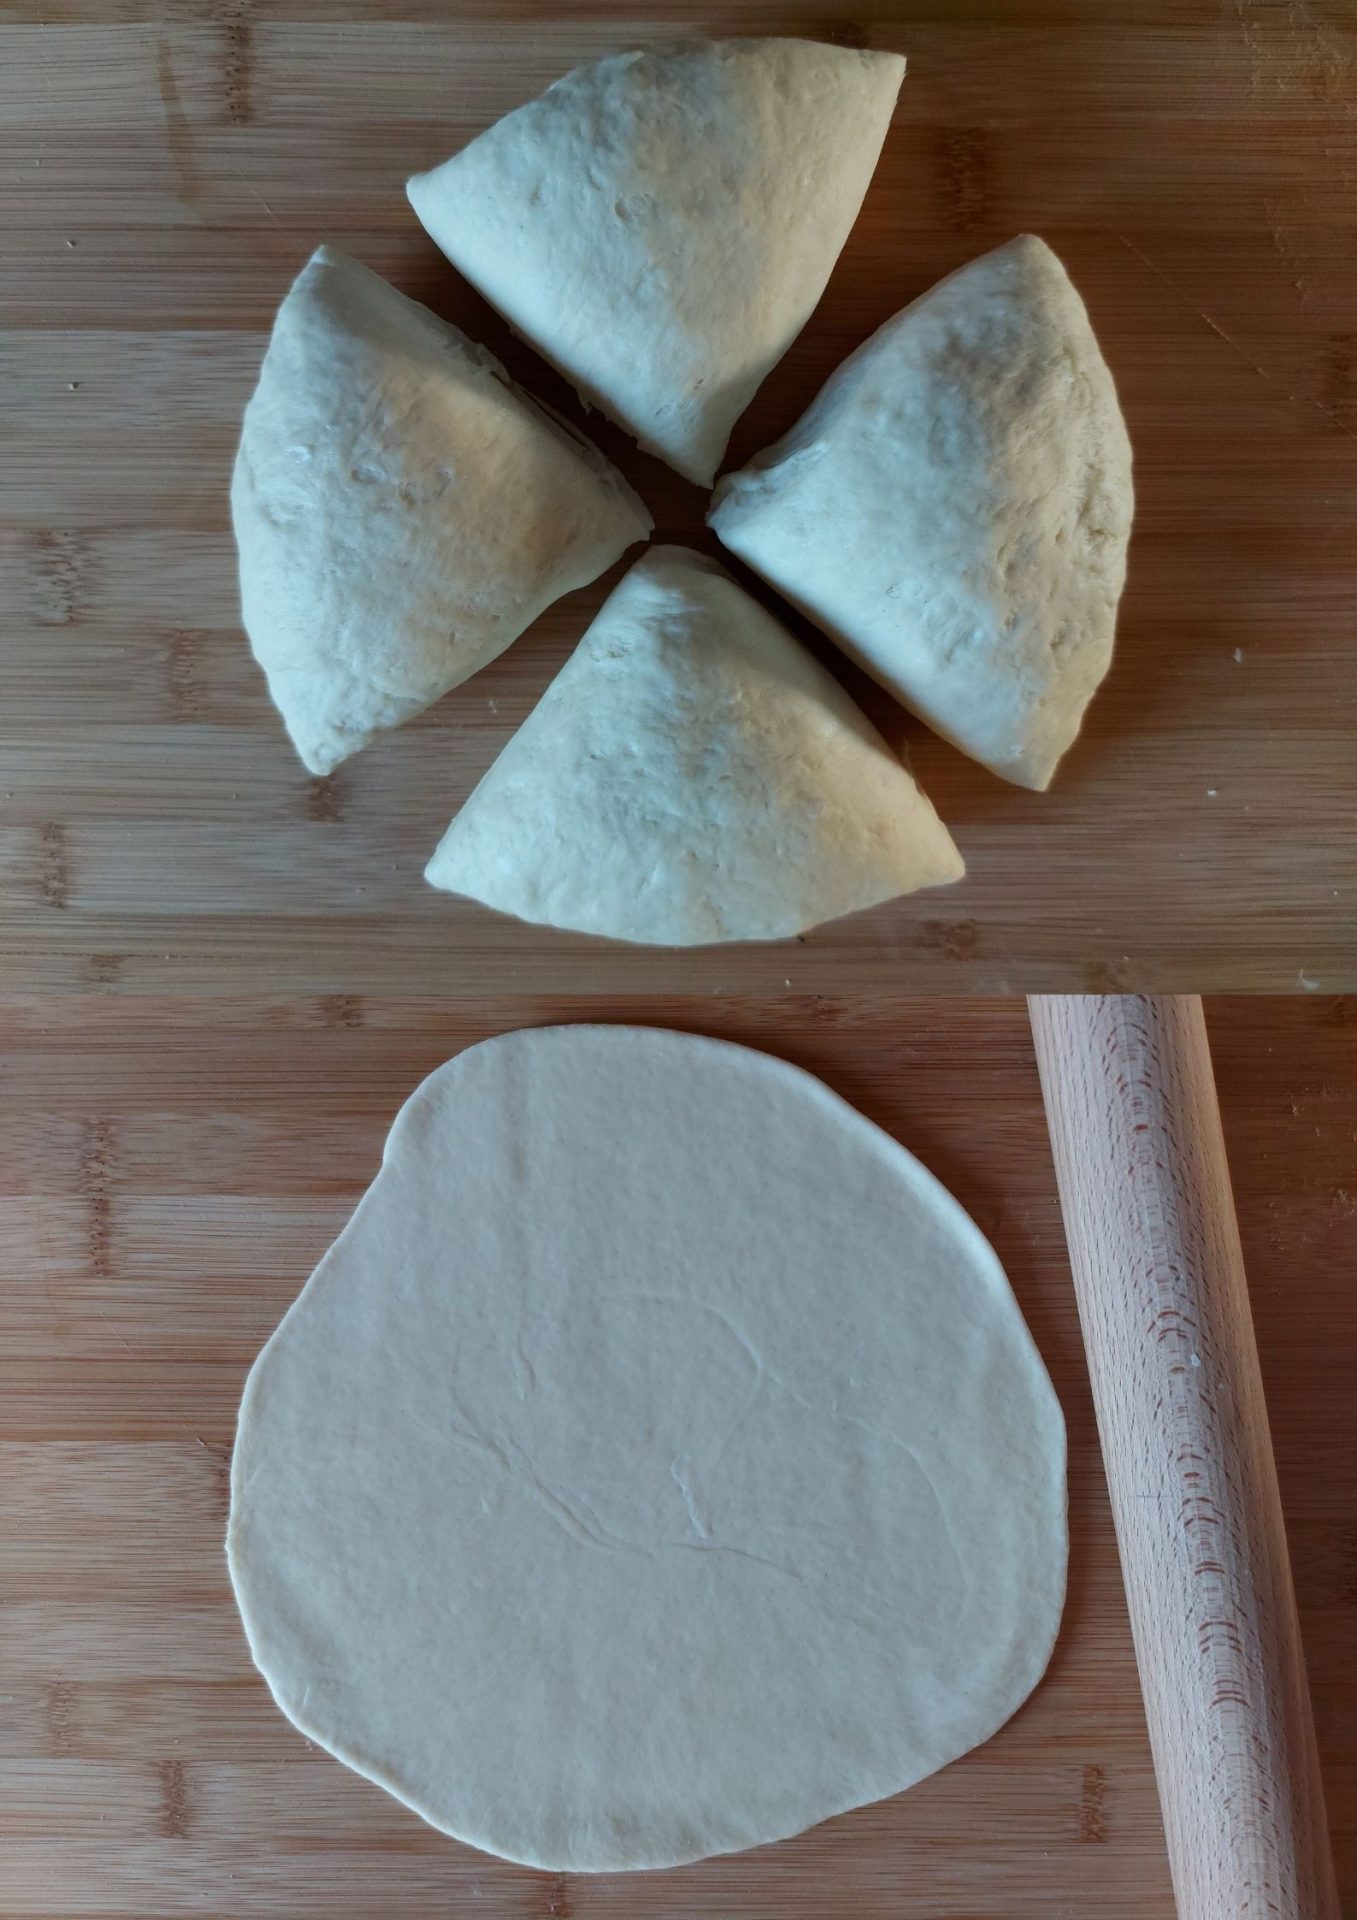 Traditional piadina recipe - how to make an authentic piadina!